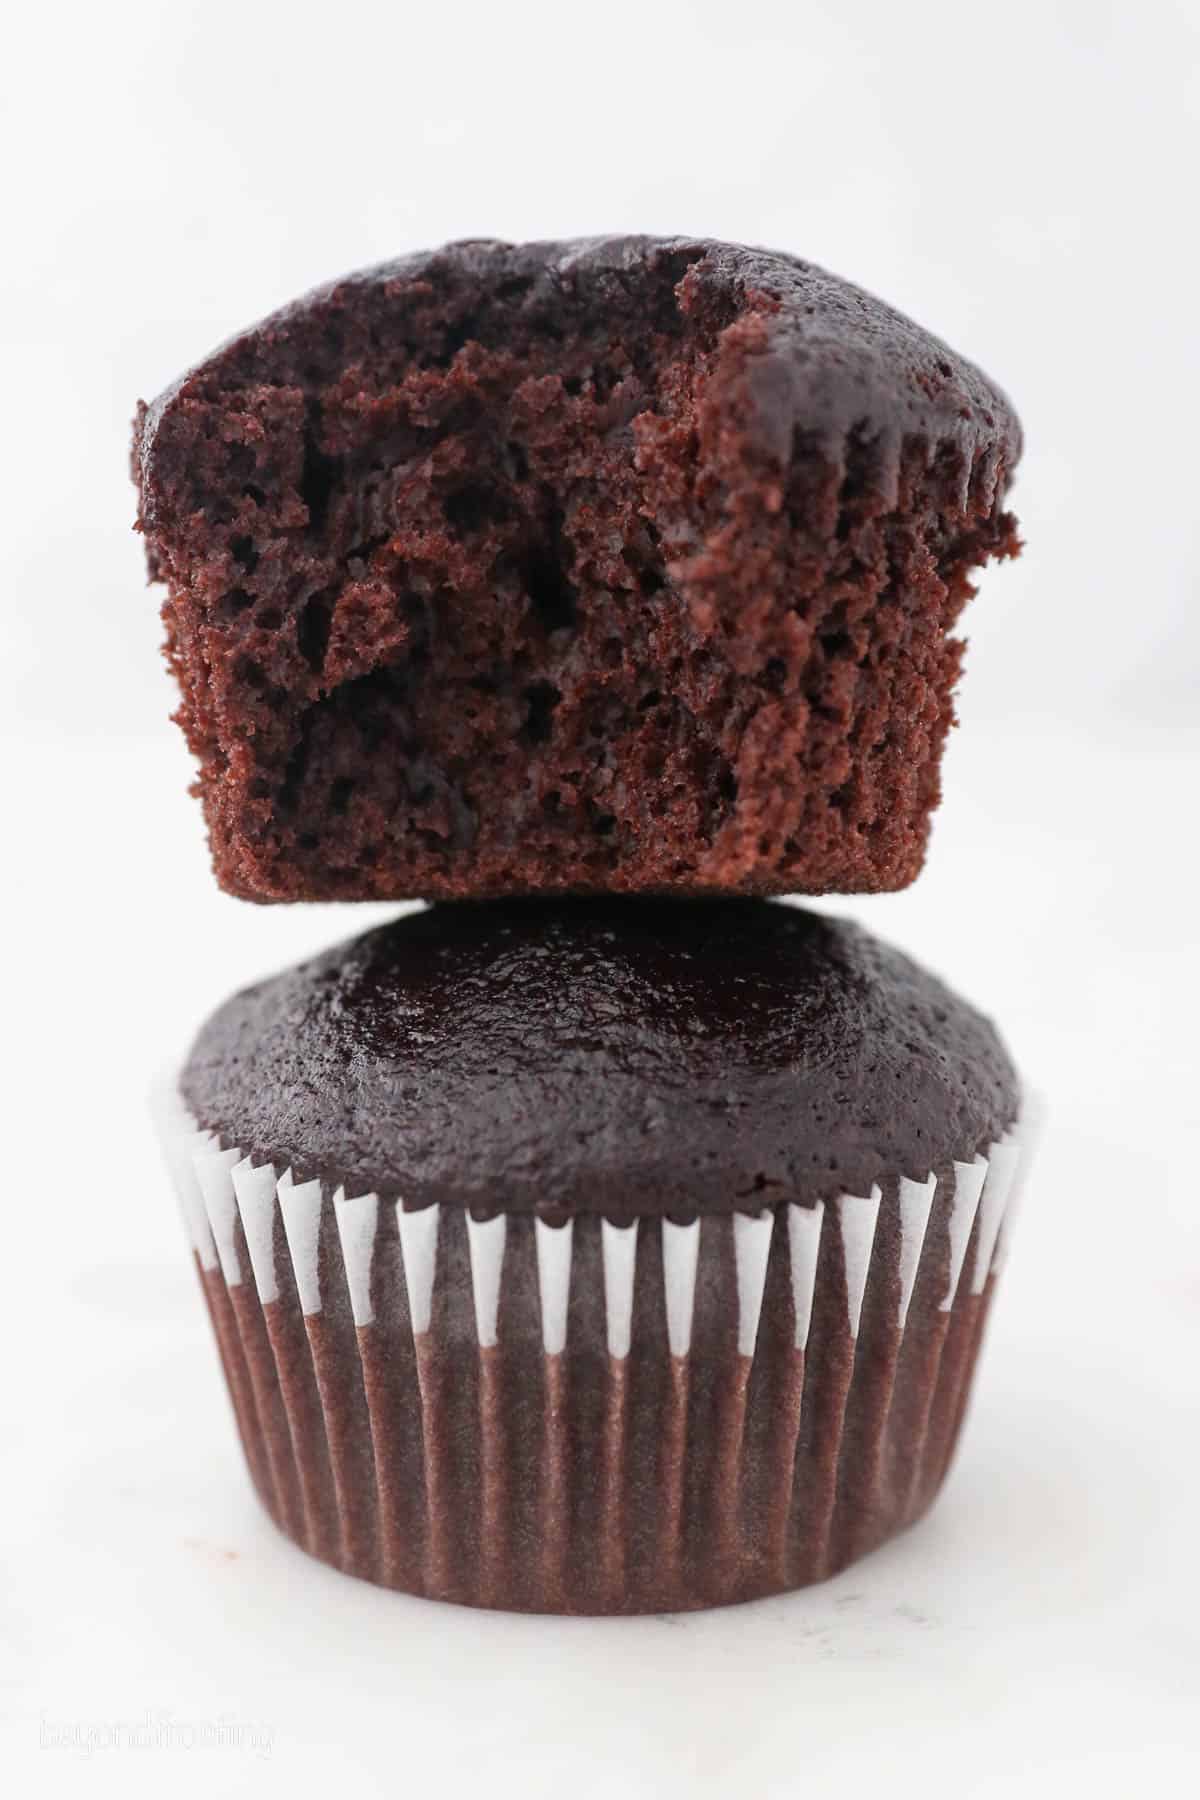 Two chocolate cupcakes stacked on top of one another, with a bite missing from the top cupcake.